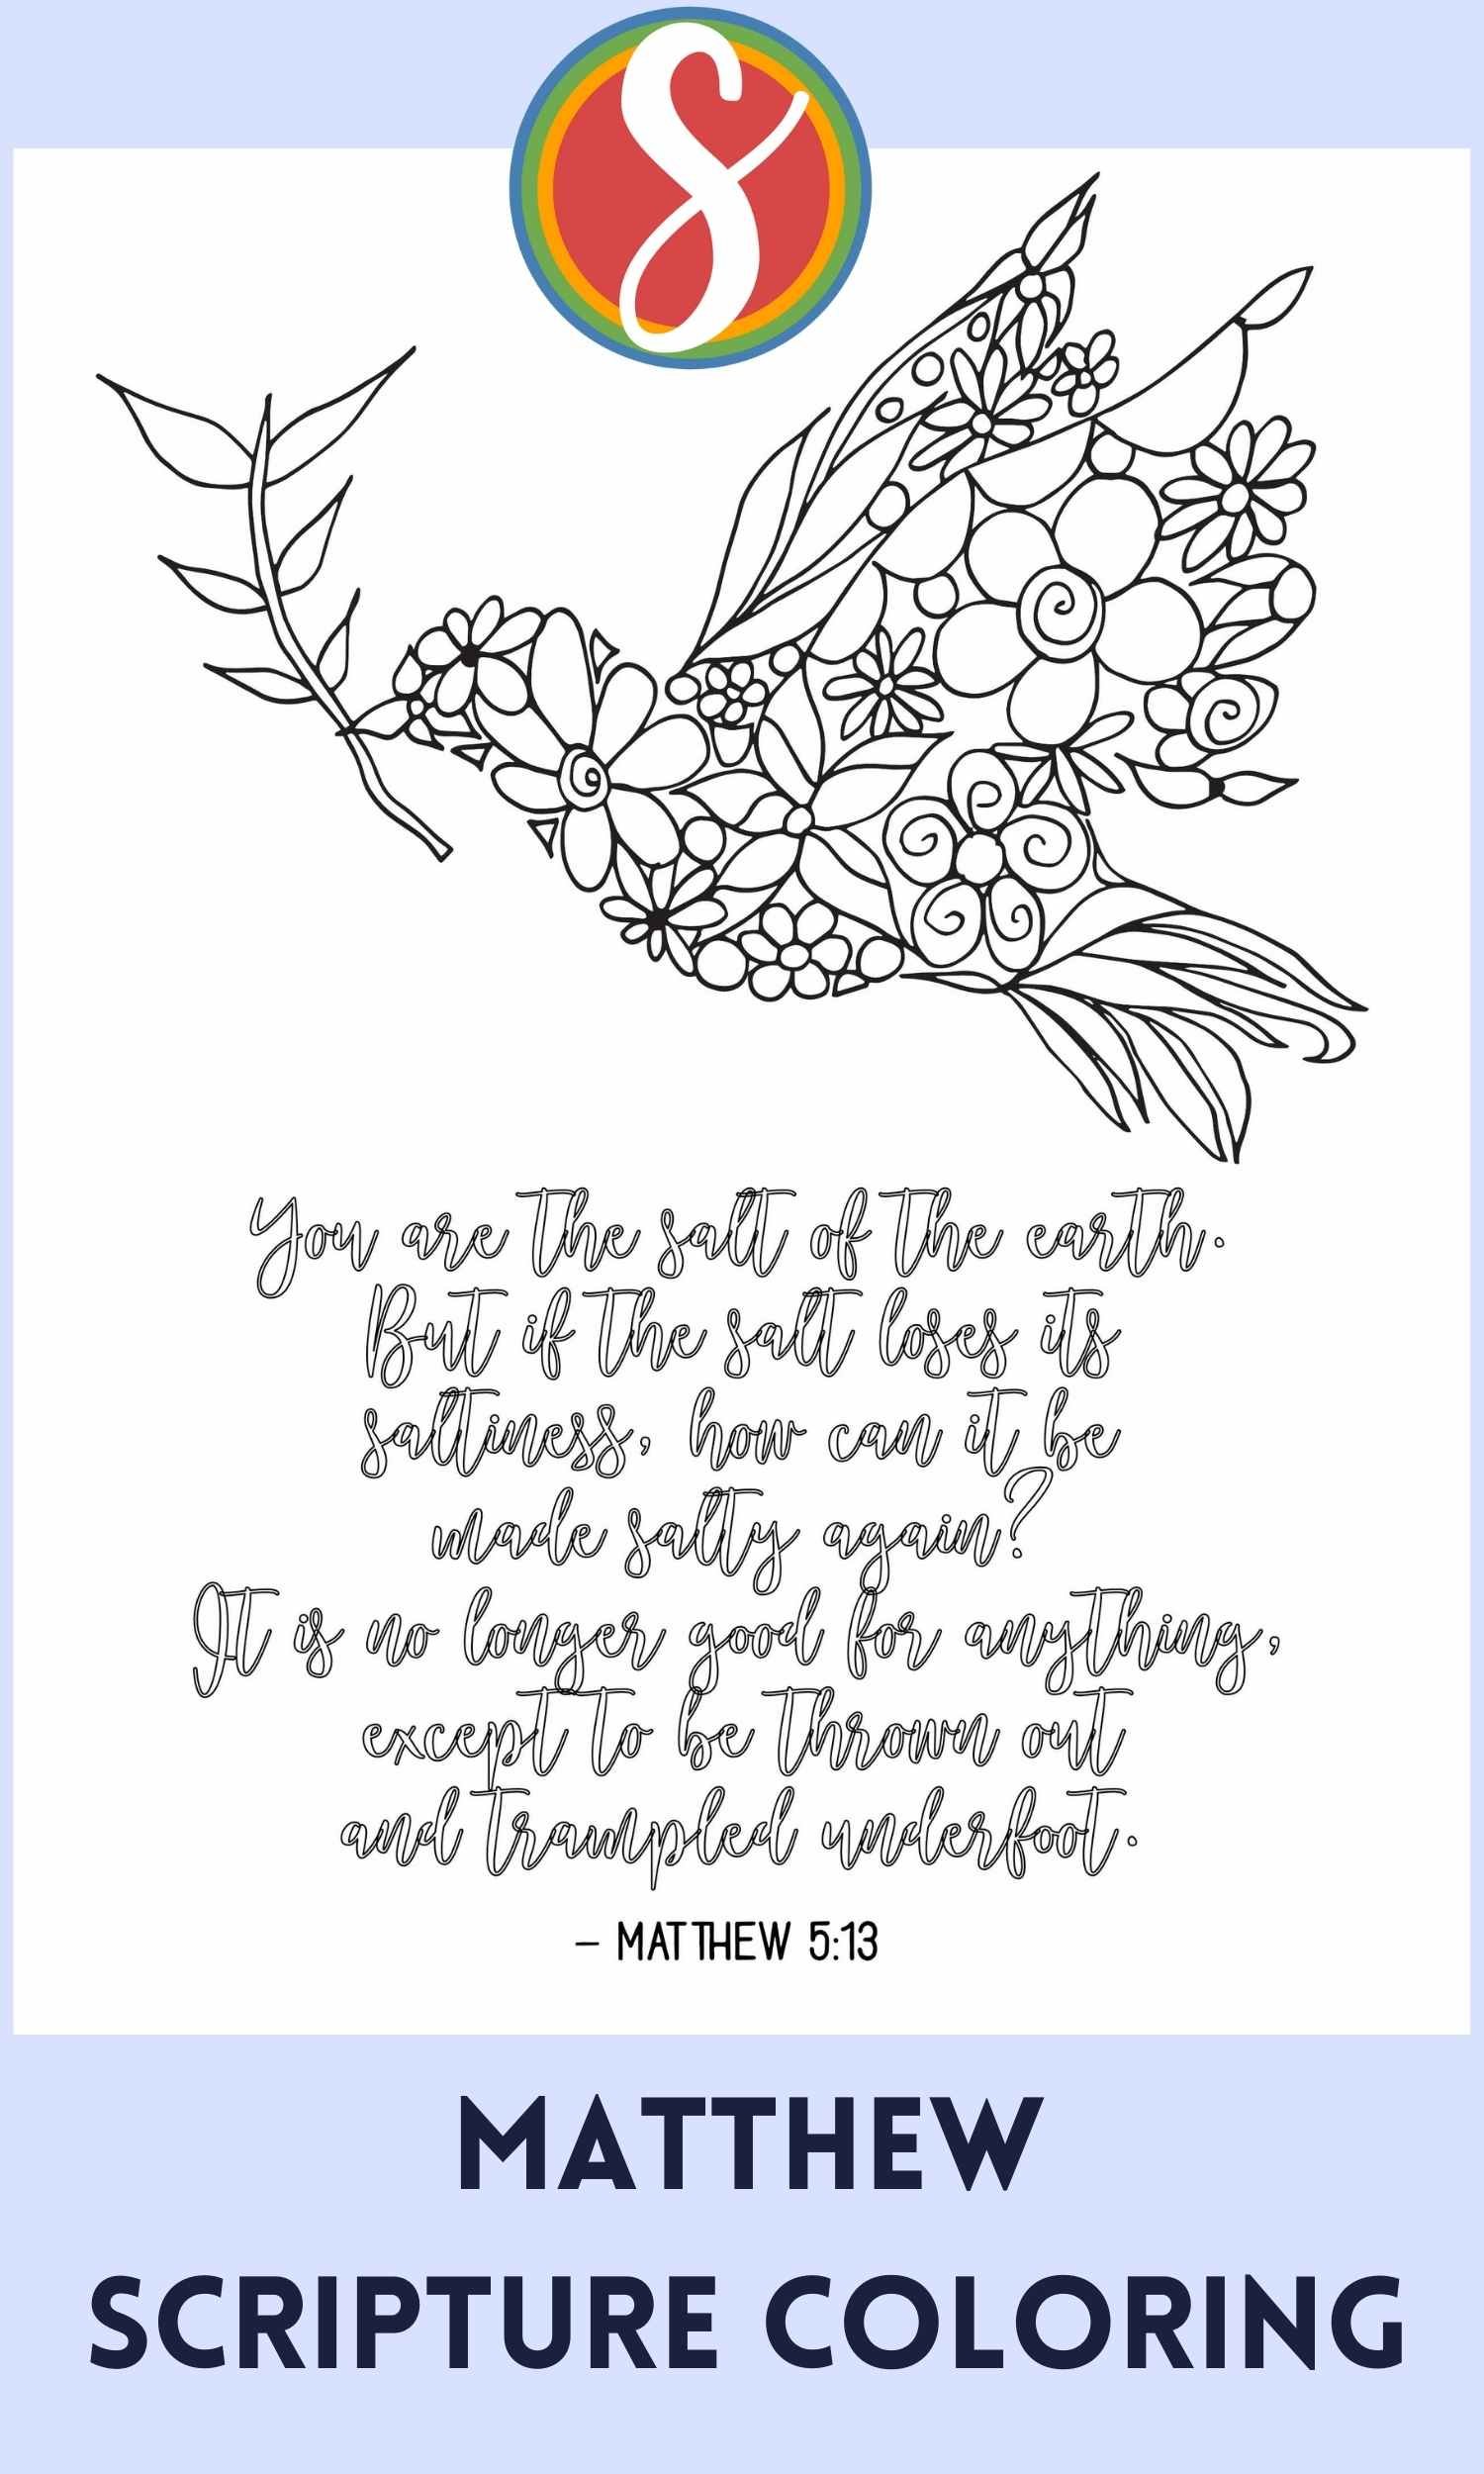 a colorable bird made up of flowers over colorable text "you are the salt of the earth. But it fate self loses its saltiness, how can it be made salty again? It is no longer good for anything, except to be thrown out and trampled underfoot"